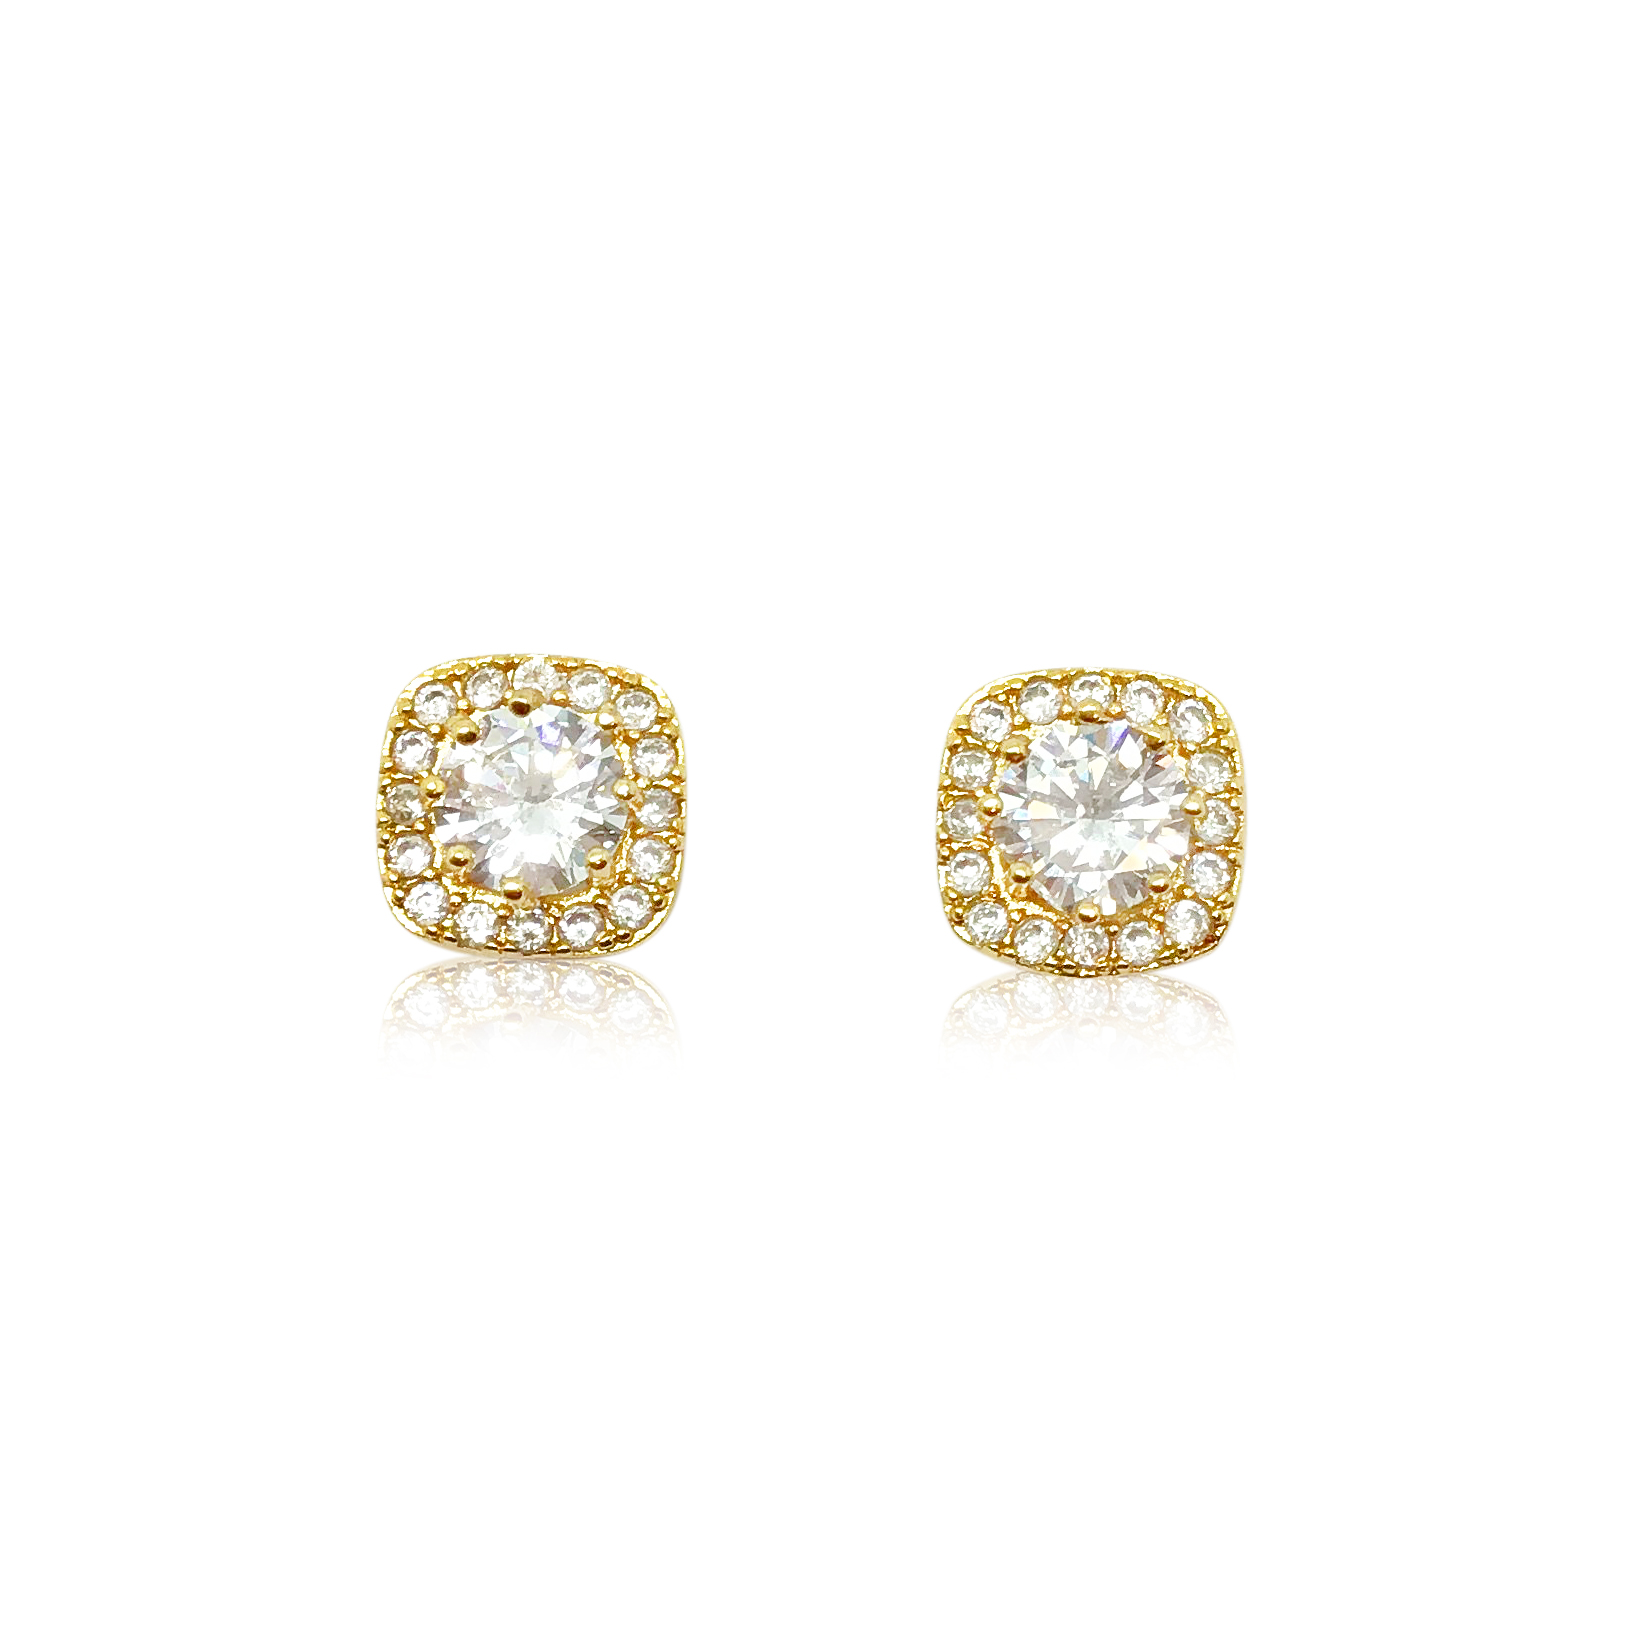 Crystal square stud earrings|Agatha|Jeanette Maree|Shop Online Now